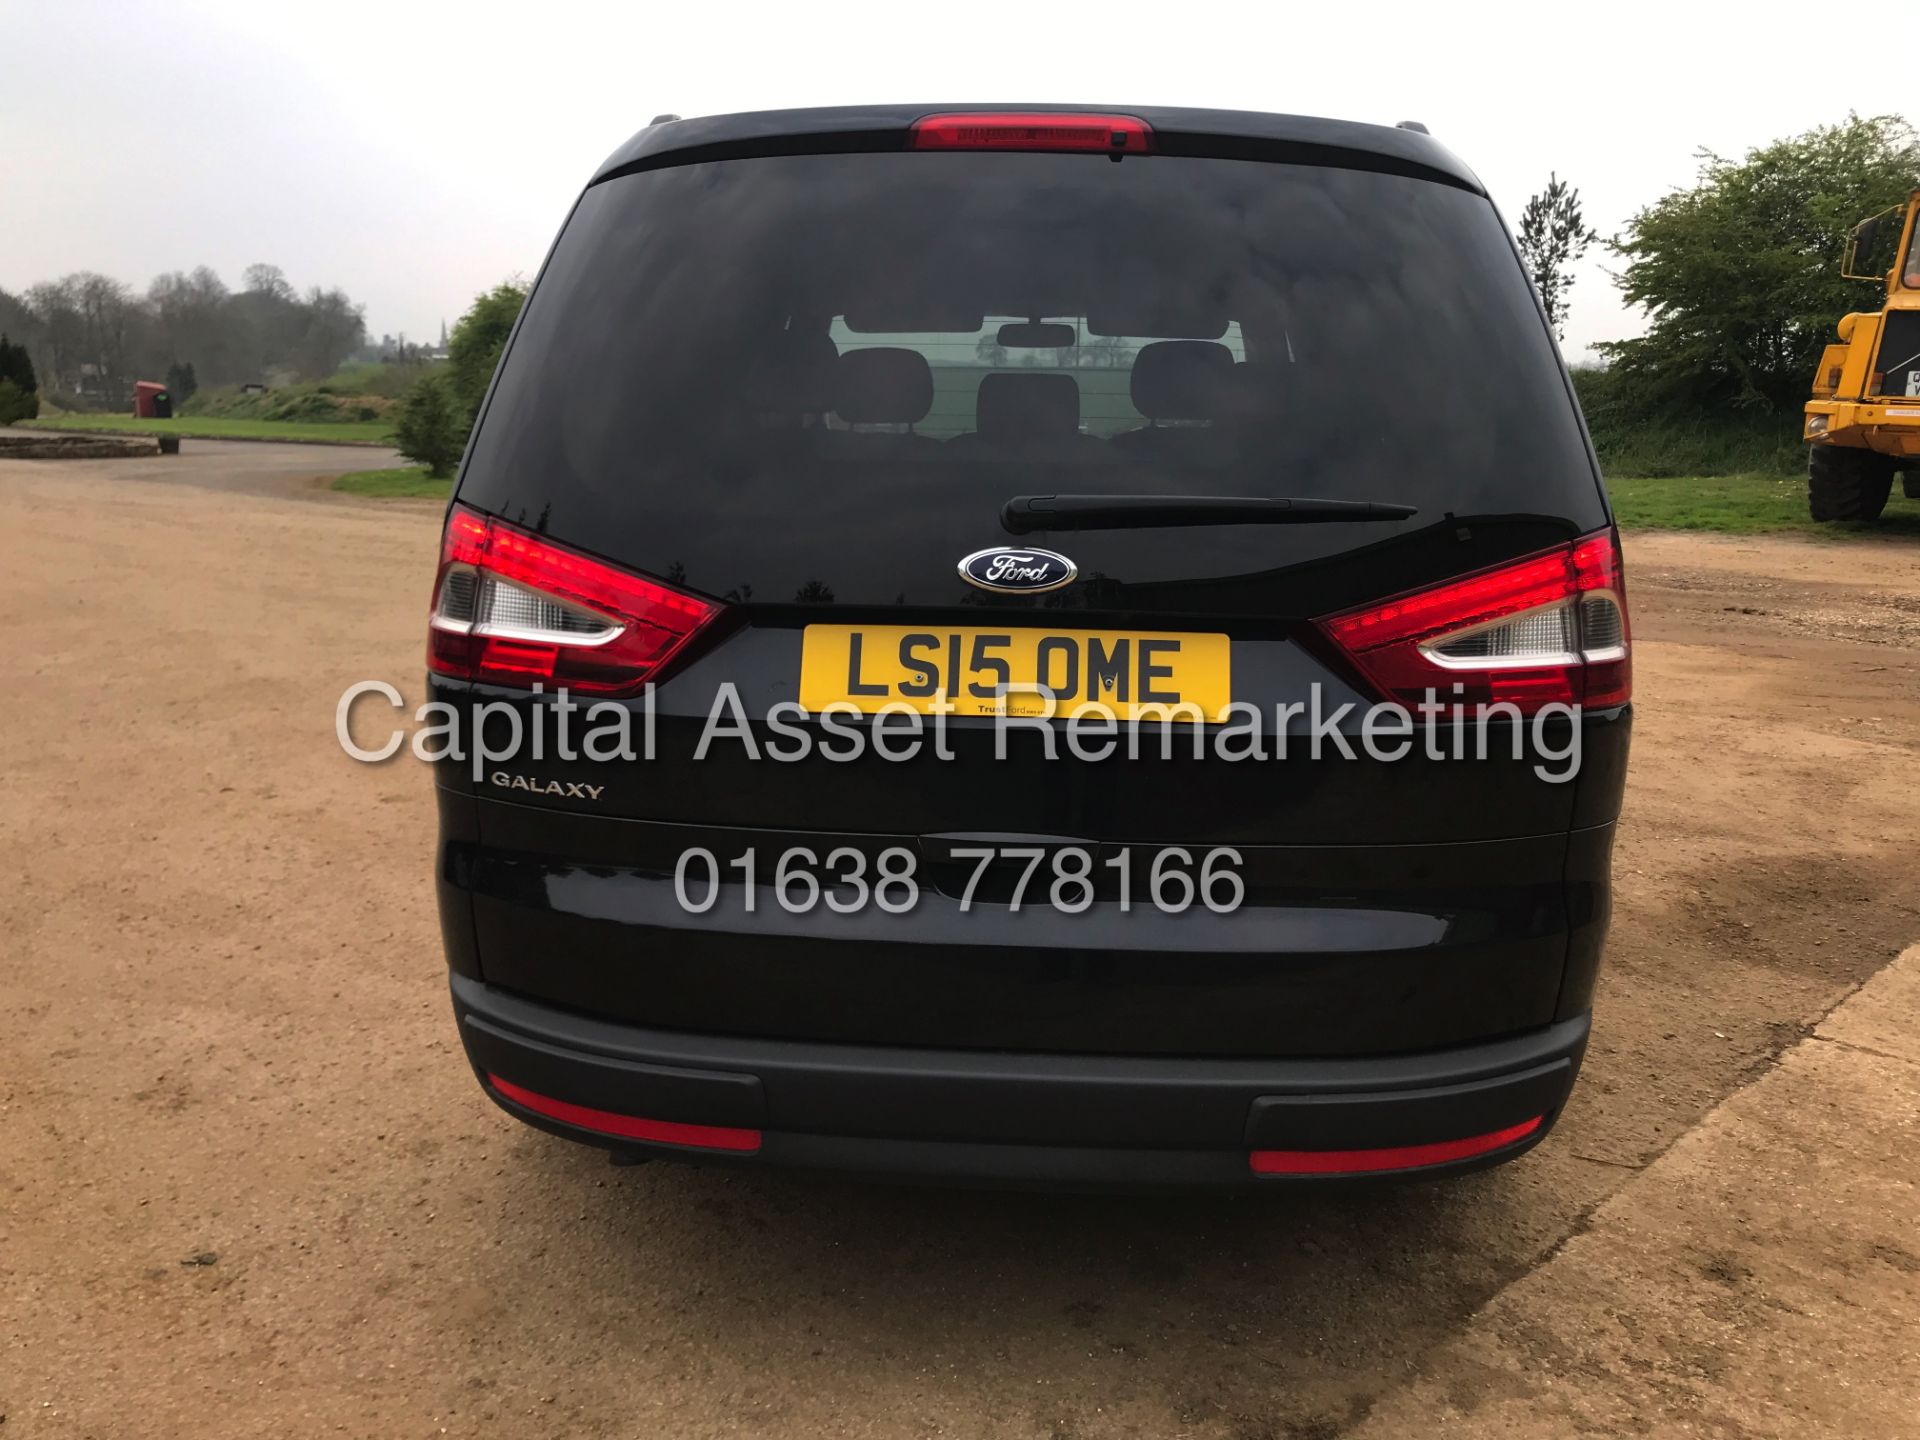 FORD GALAXY 2.0 TDCI "POWER-SHIFT / ZETEC" 7 SEATER (15 REG - NEW SHAPE) 1 OWNER - 140BHP - AIR CON - Image 4 of 22